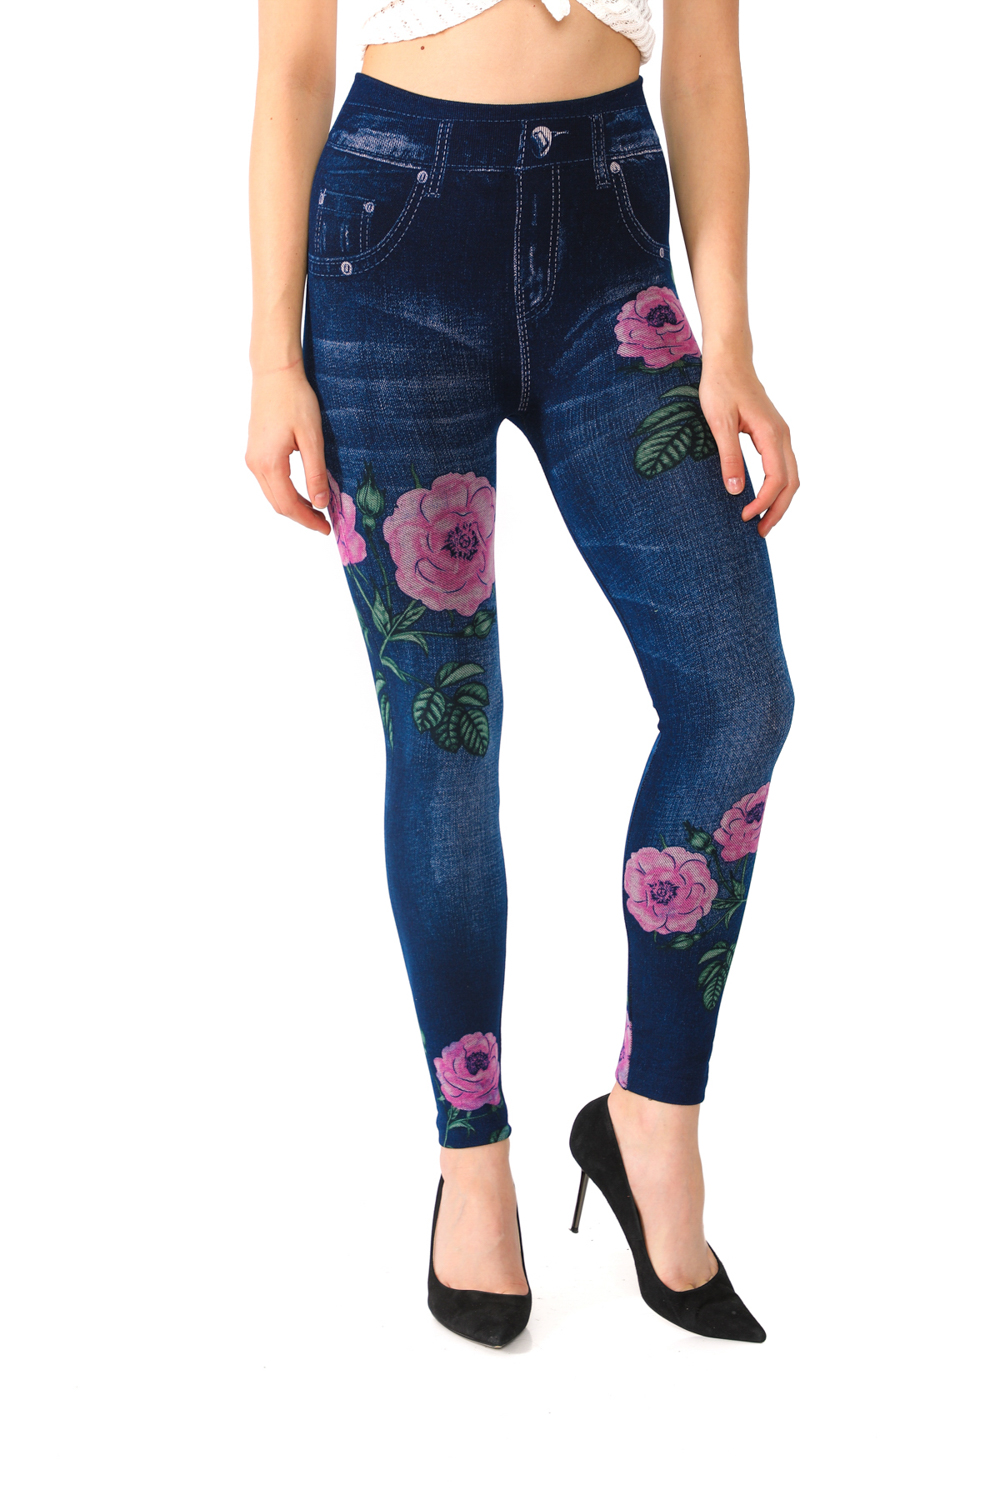 Denim Leggings with Colorful Floral Rosy Pattern